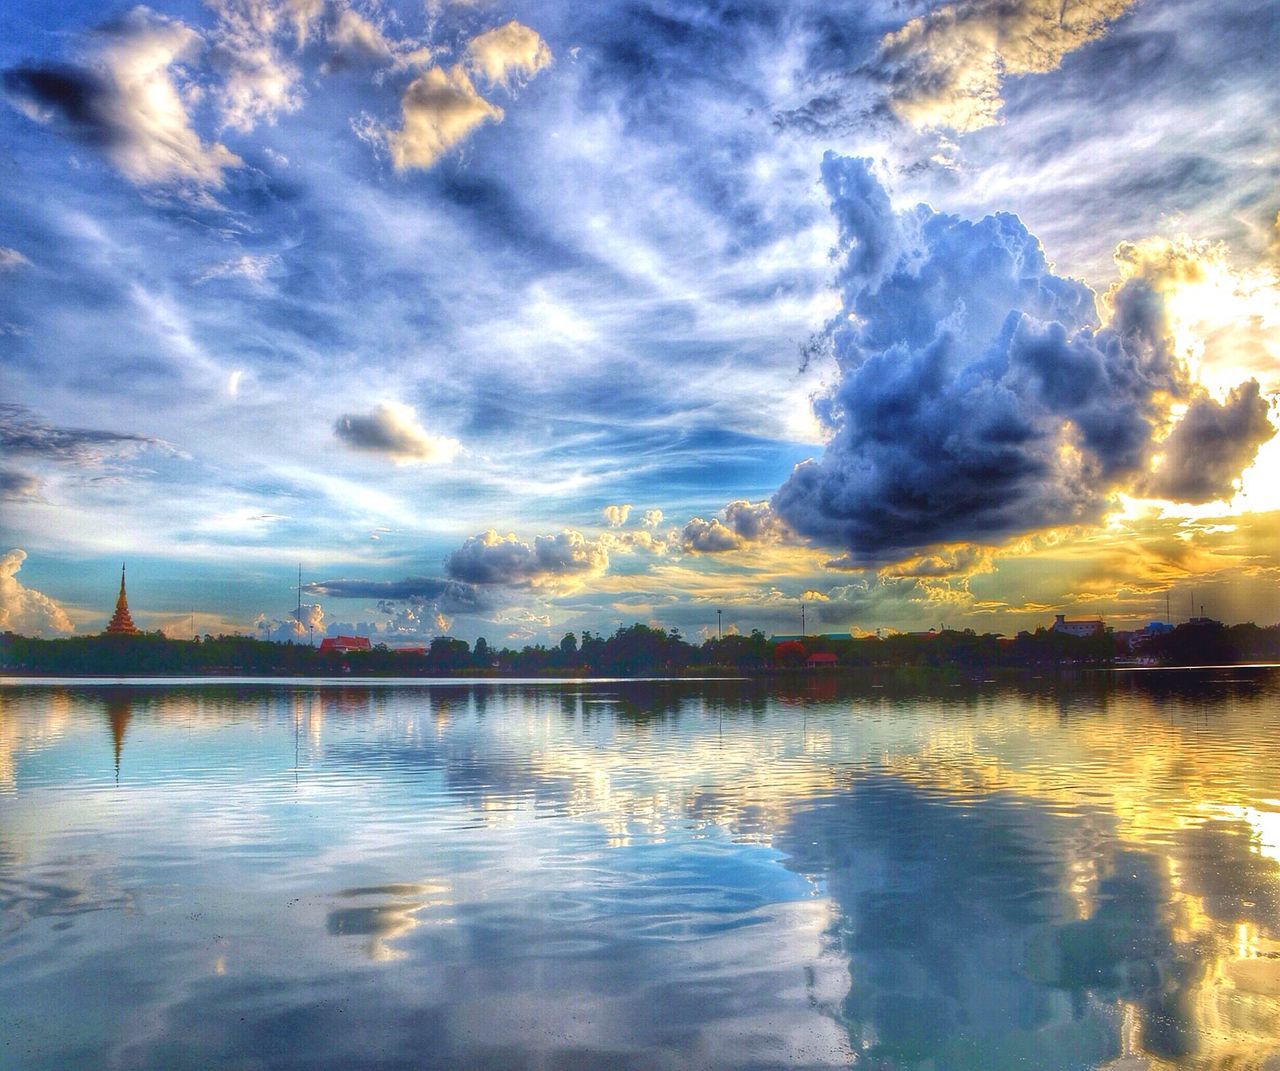 water, sky, reflection, cloud - sky, sunset, waterfront, tranquil scene, lake, scenics, tranquility, cloud, cloudy, beauty in nature, nature, idyllic, rippled, silhouette, river, dramatic sky, outdoors